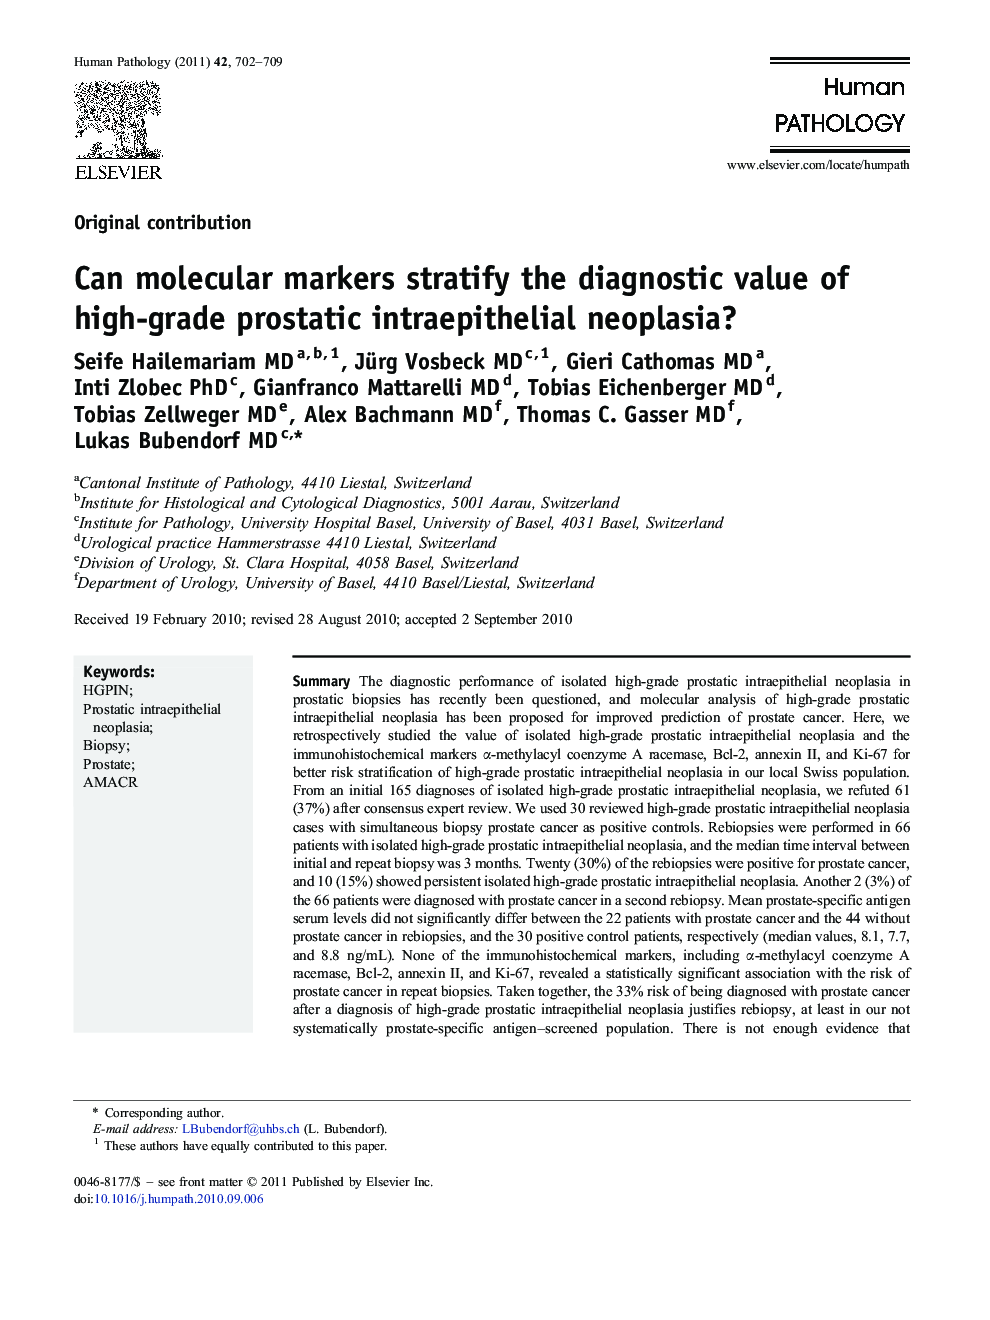 Can molecular markers stratify the diagnostic value of high-grade prostatic intraepithelial neoplasia?